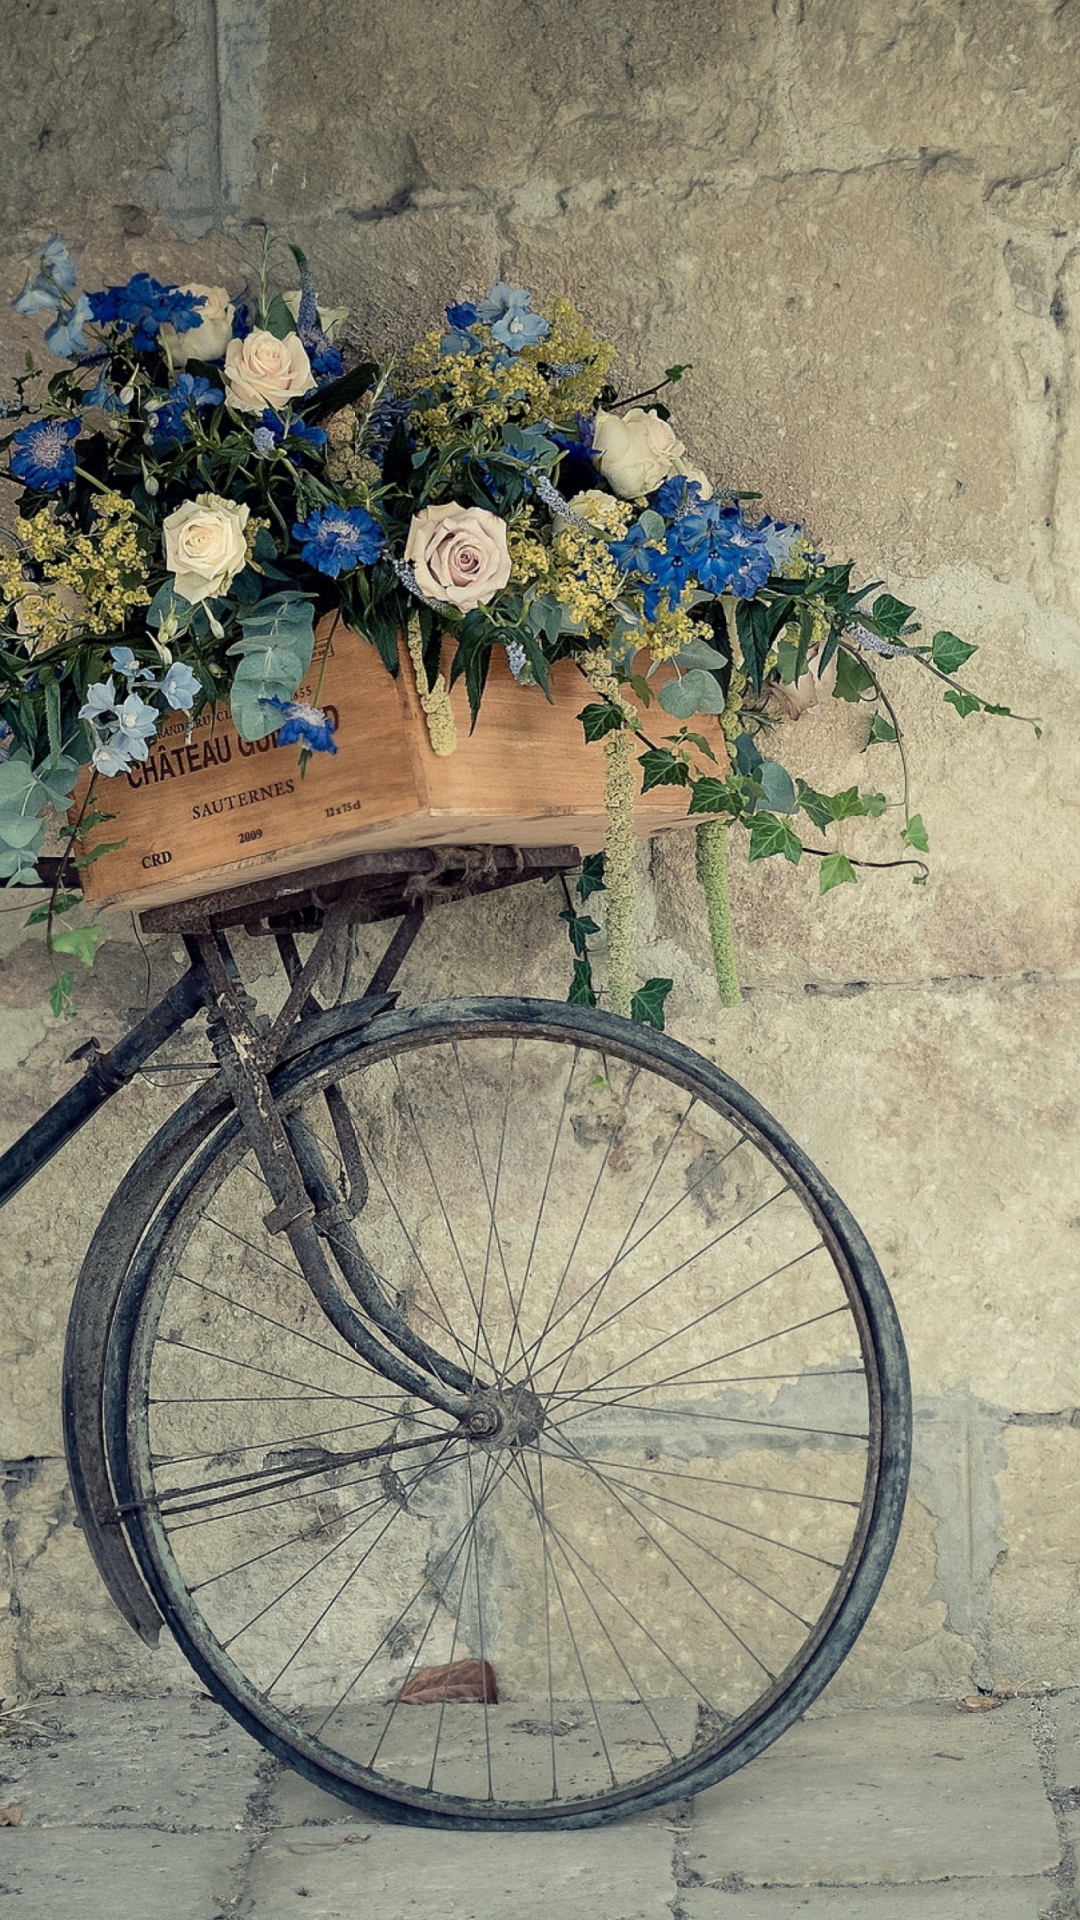 Fondo de pantalla Bicycle With Basket Full Of Flowers 1080x1920